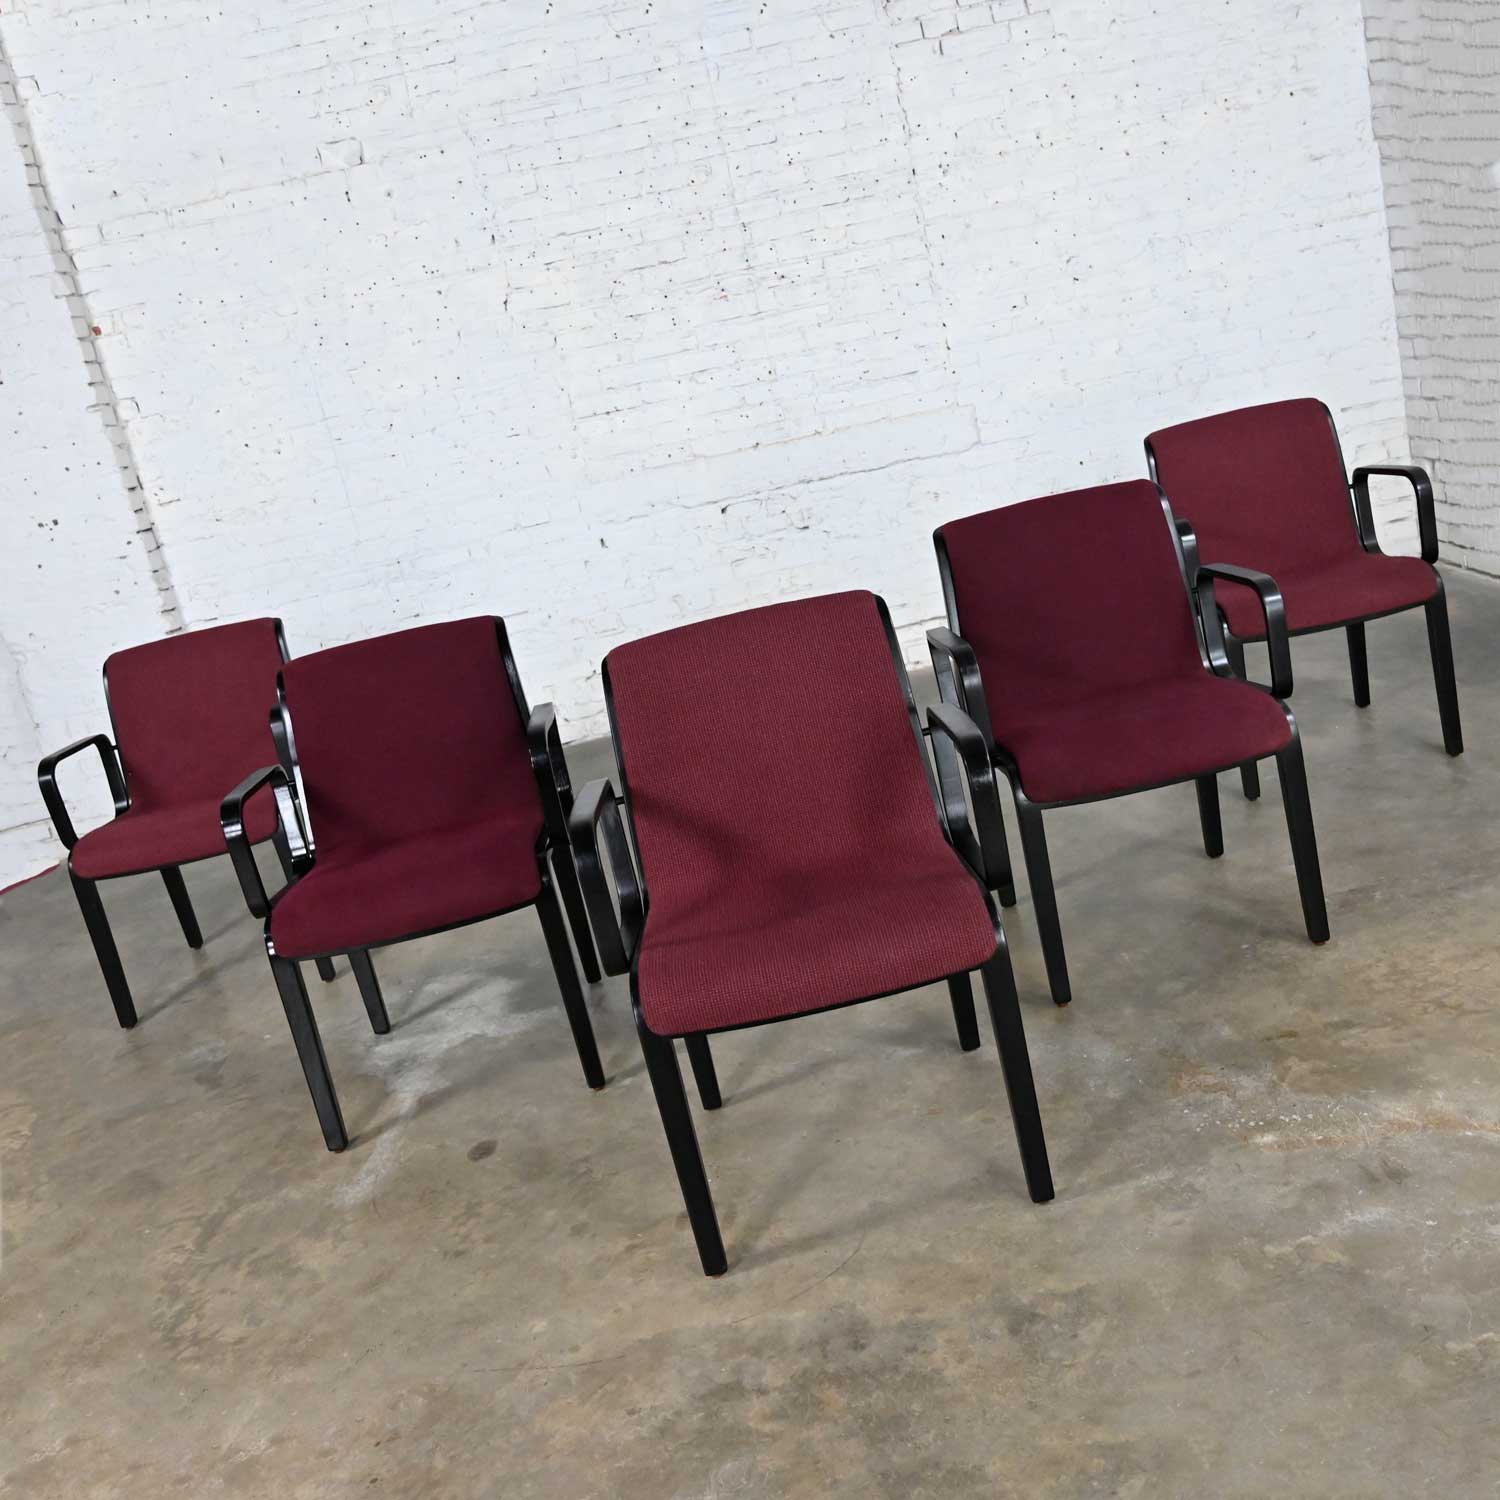 Vintage MCM Bentwood 1300 Series Dining Chairs Maroon Fabric & Black Frames by Bill Stephens for Knoll Set of 5